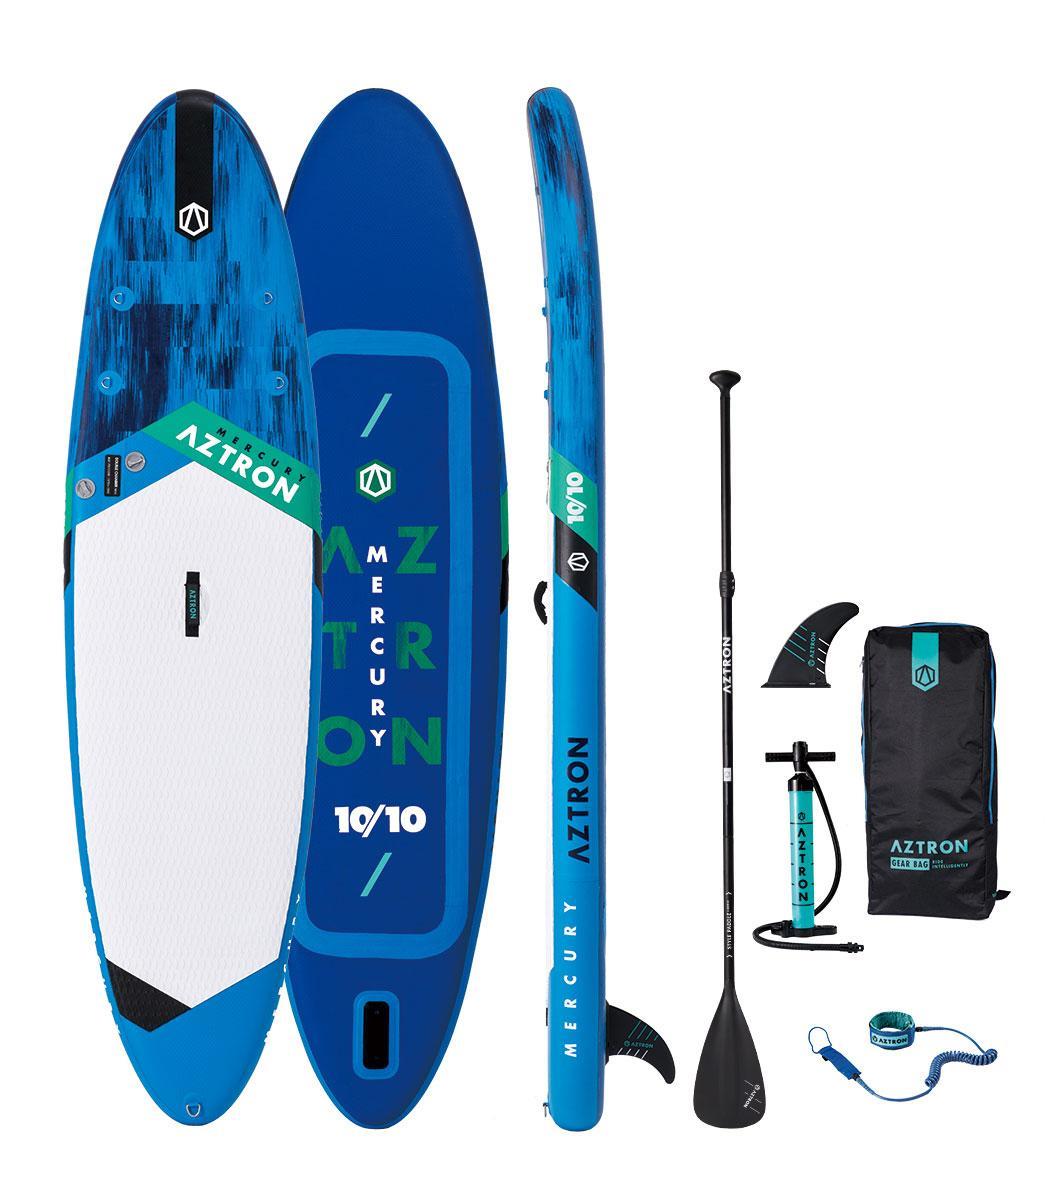 AZTRON MERCURY 10.10ft 330cm INFLATABLE STAND UP PADDLE BOARD SUP Riders < 140kg